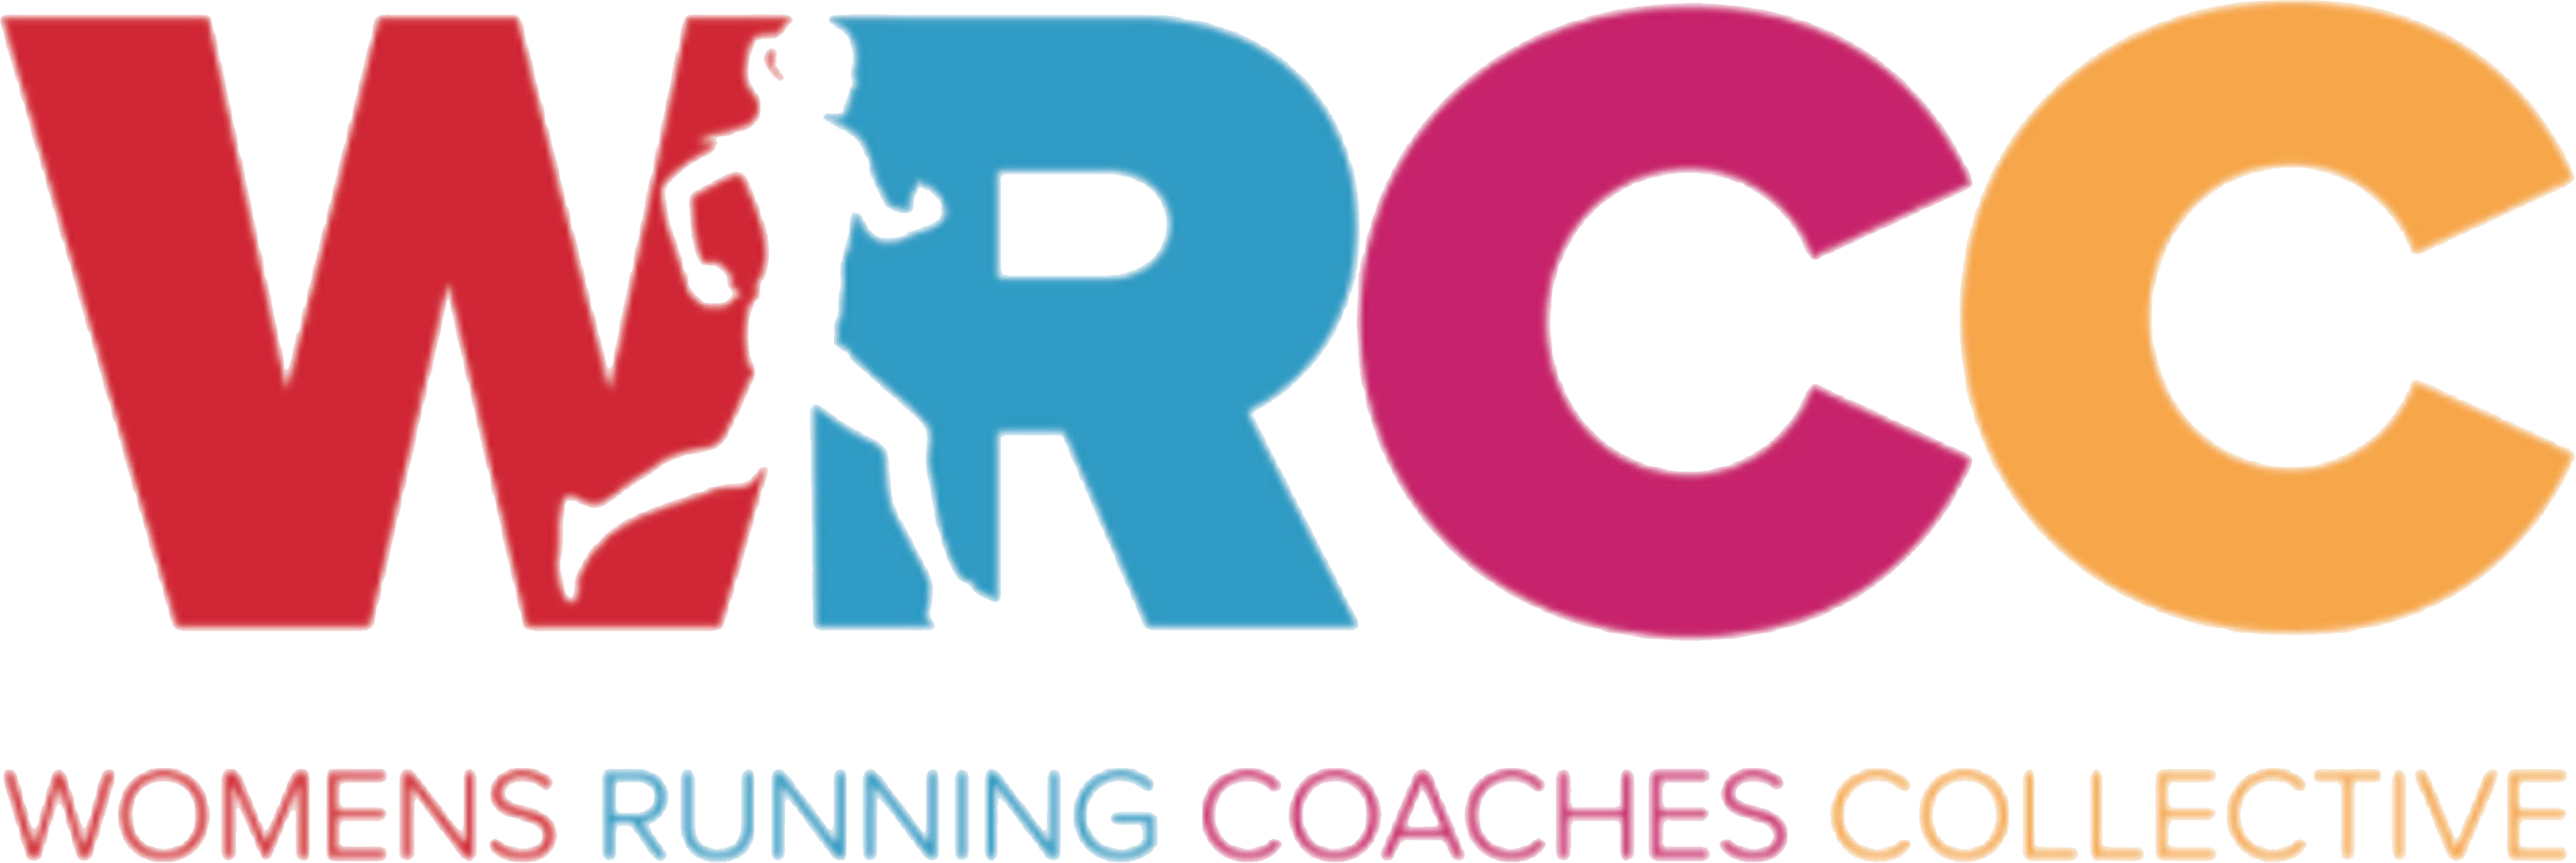 Womens Running Coaching Collective